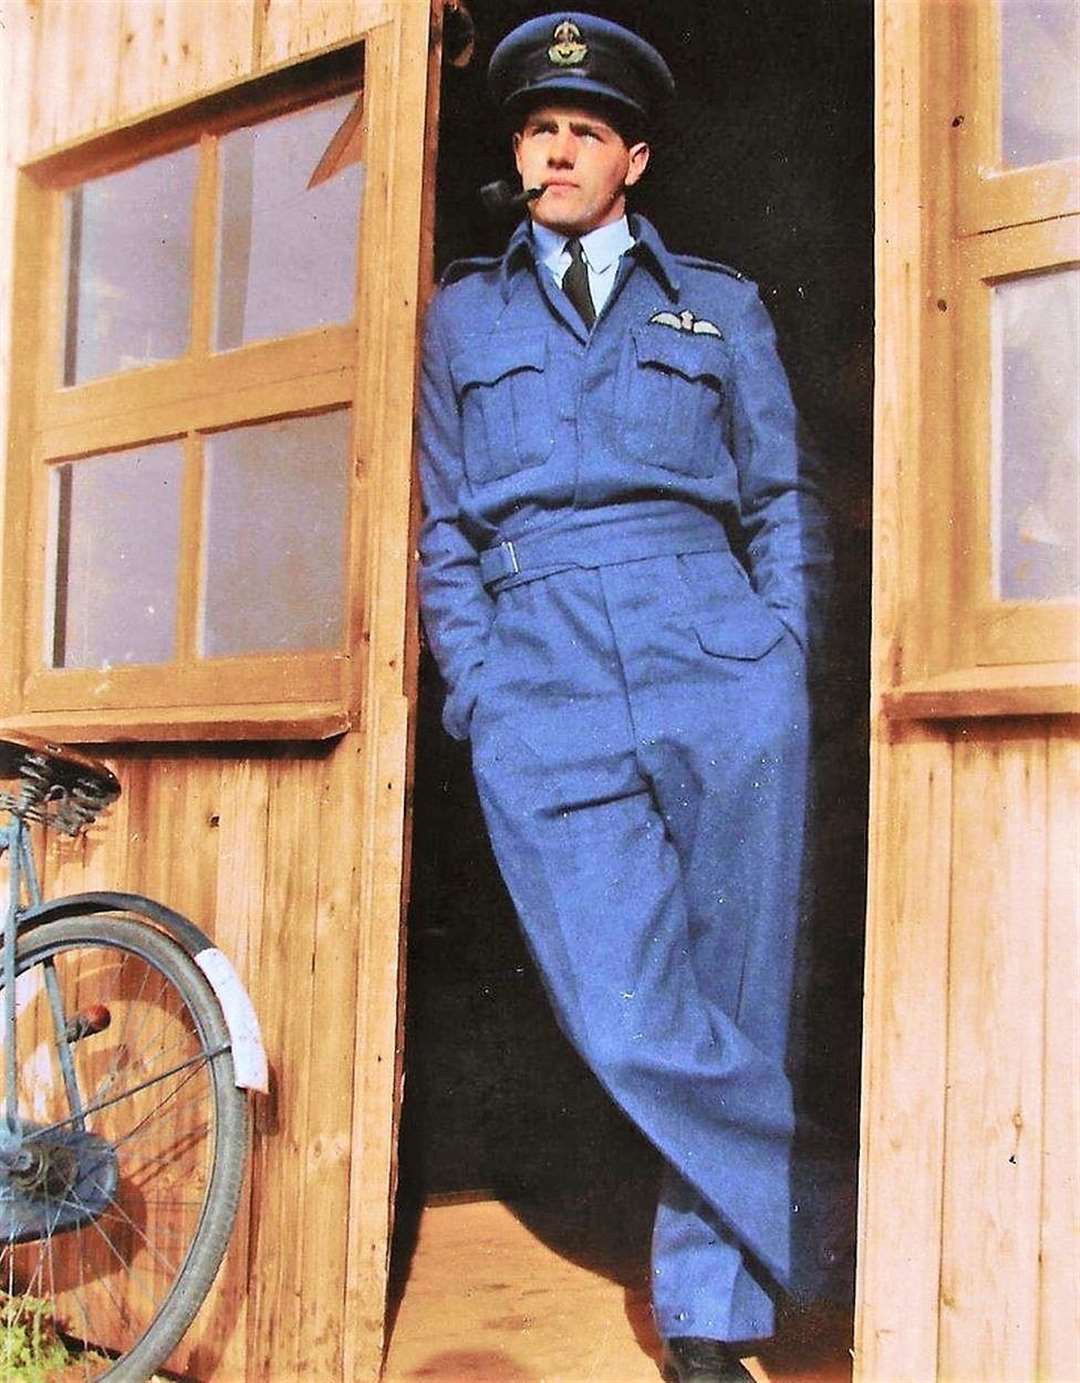 Sandy Gunn as a prisoner of war in Stalag Luft III. Picture: The family of Flight Lieutenant A.D.M. Gunn (60340) R.A.F.V.R. and Spitfire AA810 Restoration Ltd.